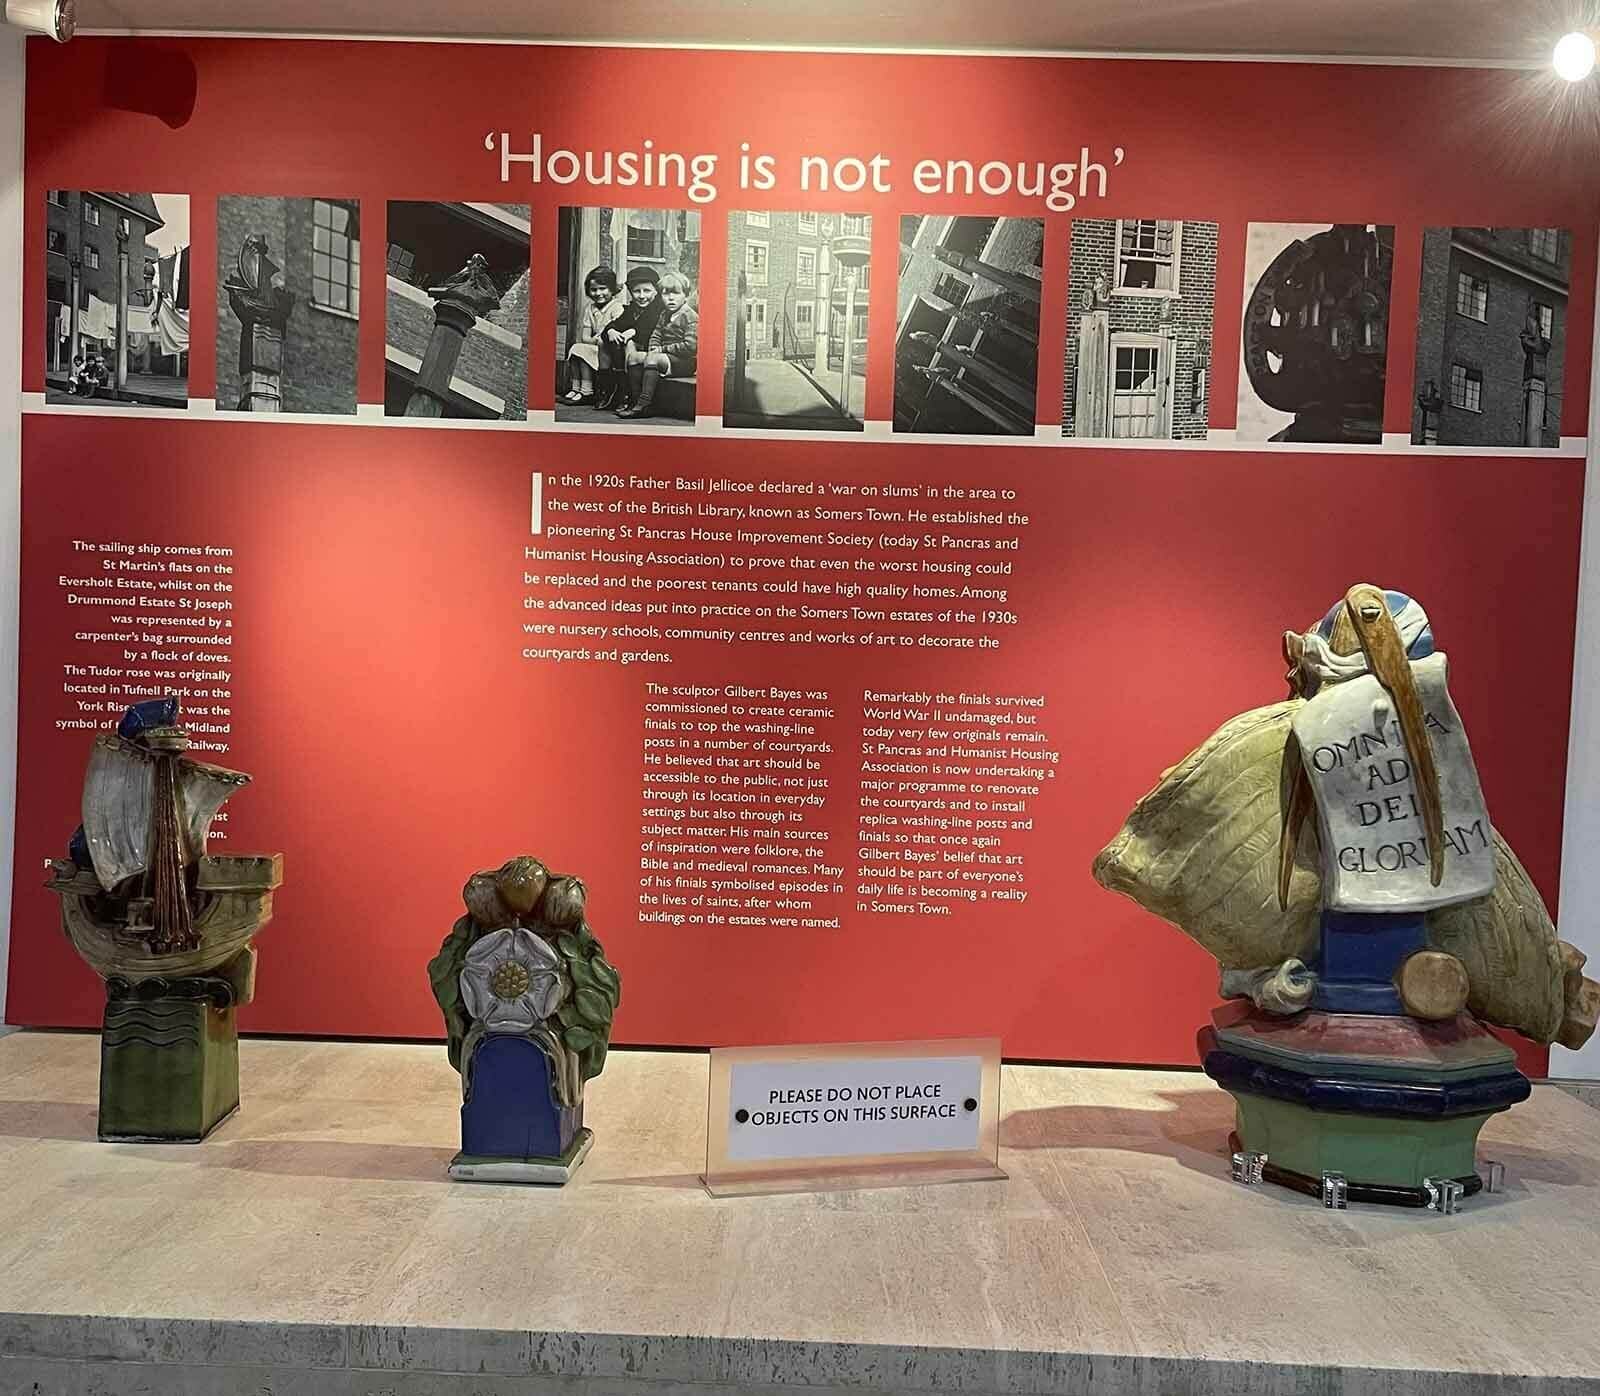 Exhibition in the British Library calling attention to housing inequality.